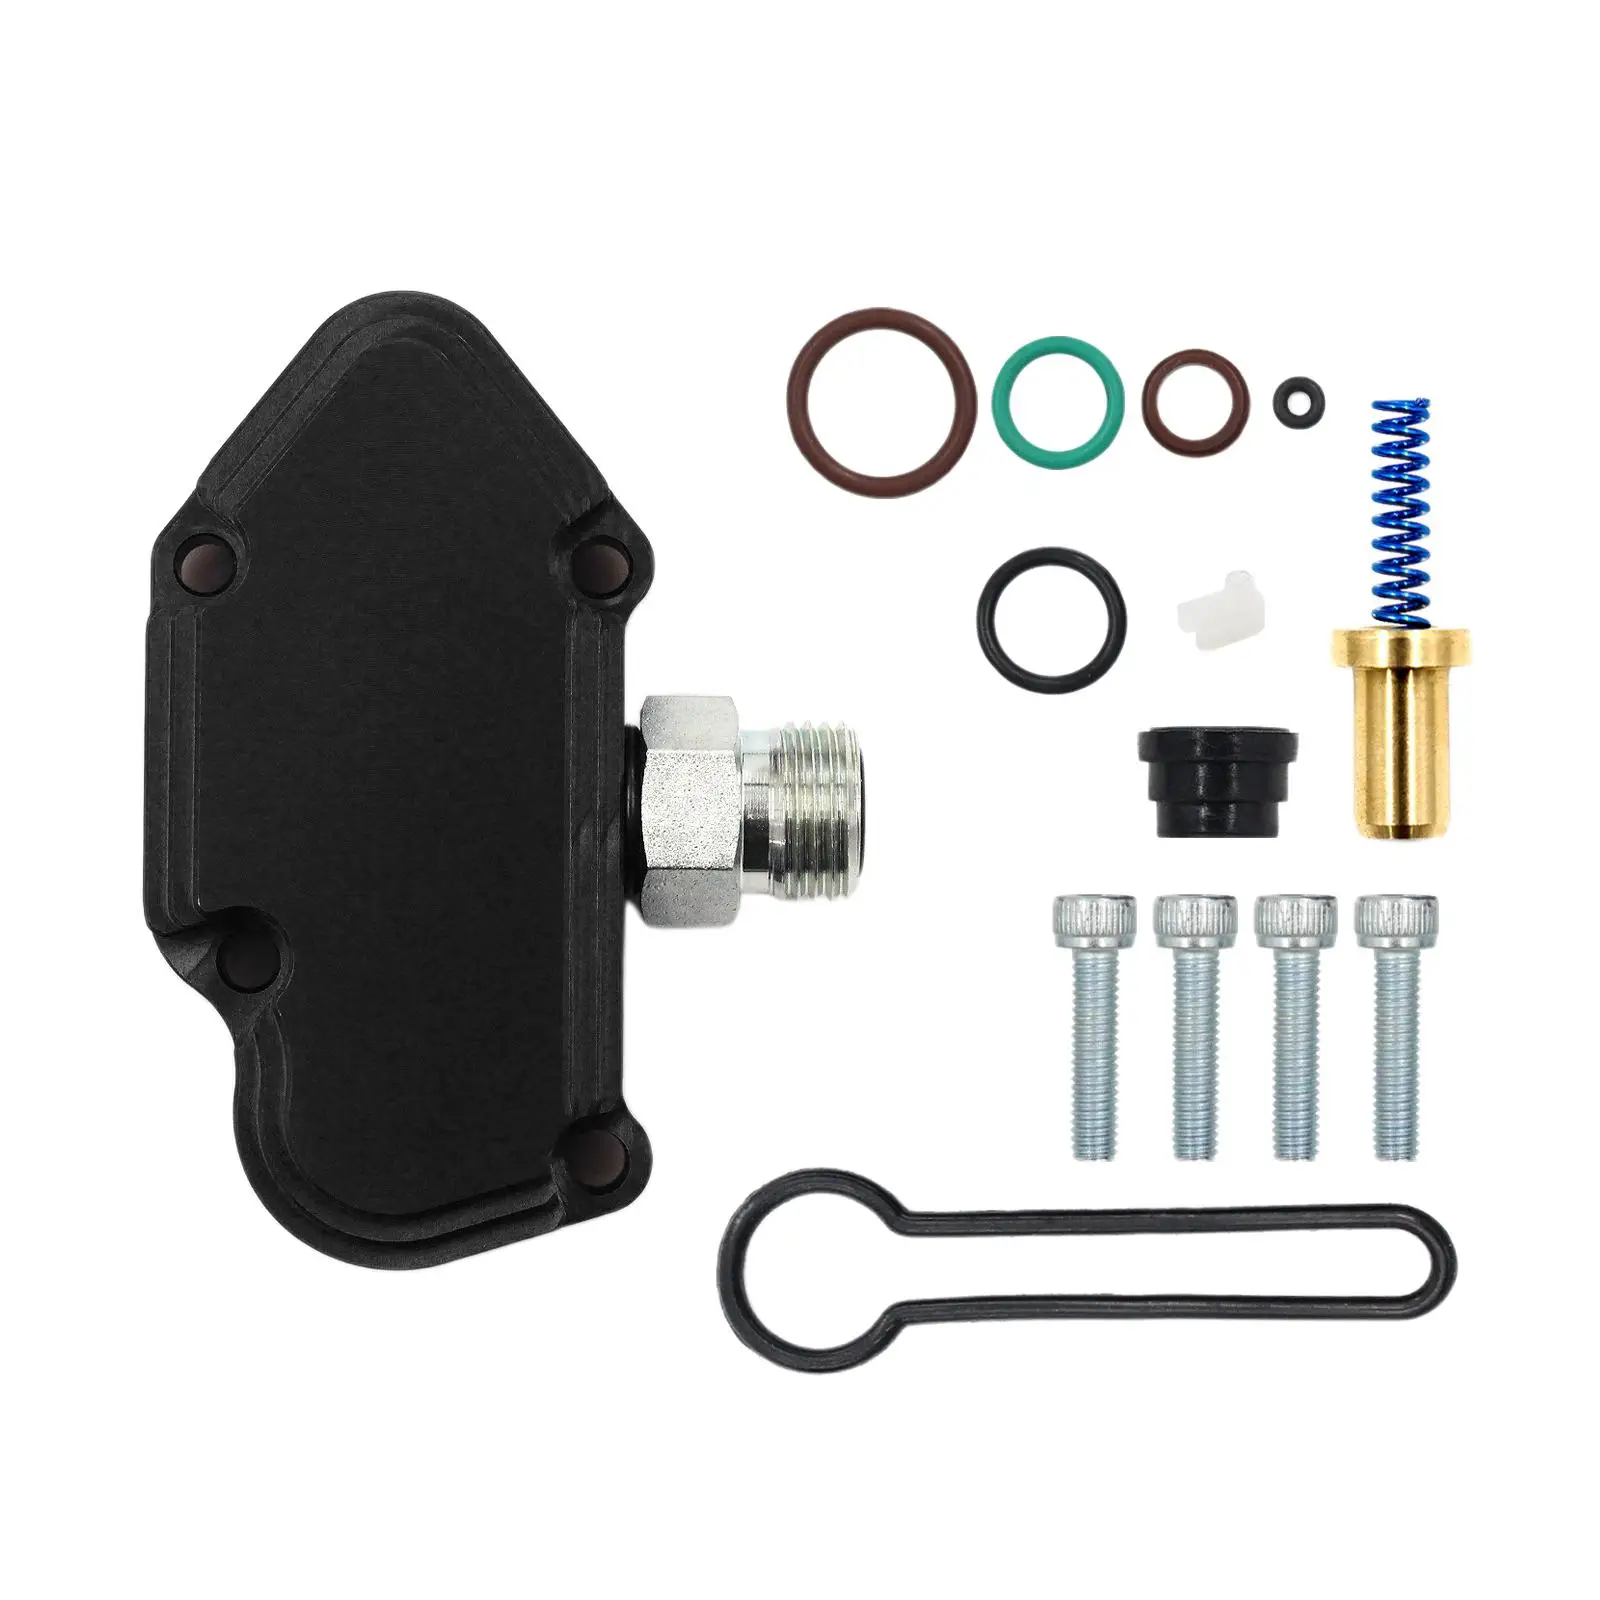 Blue Spring Kits Replace Reliable Convenient Easy Installation Fuel Pressure Regulator Adjustable for 2003-2007 Powerstroke